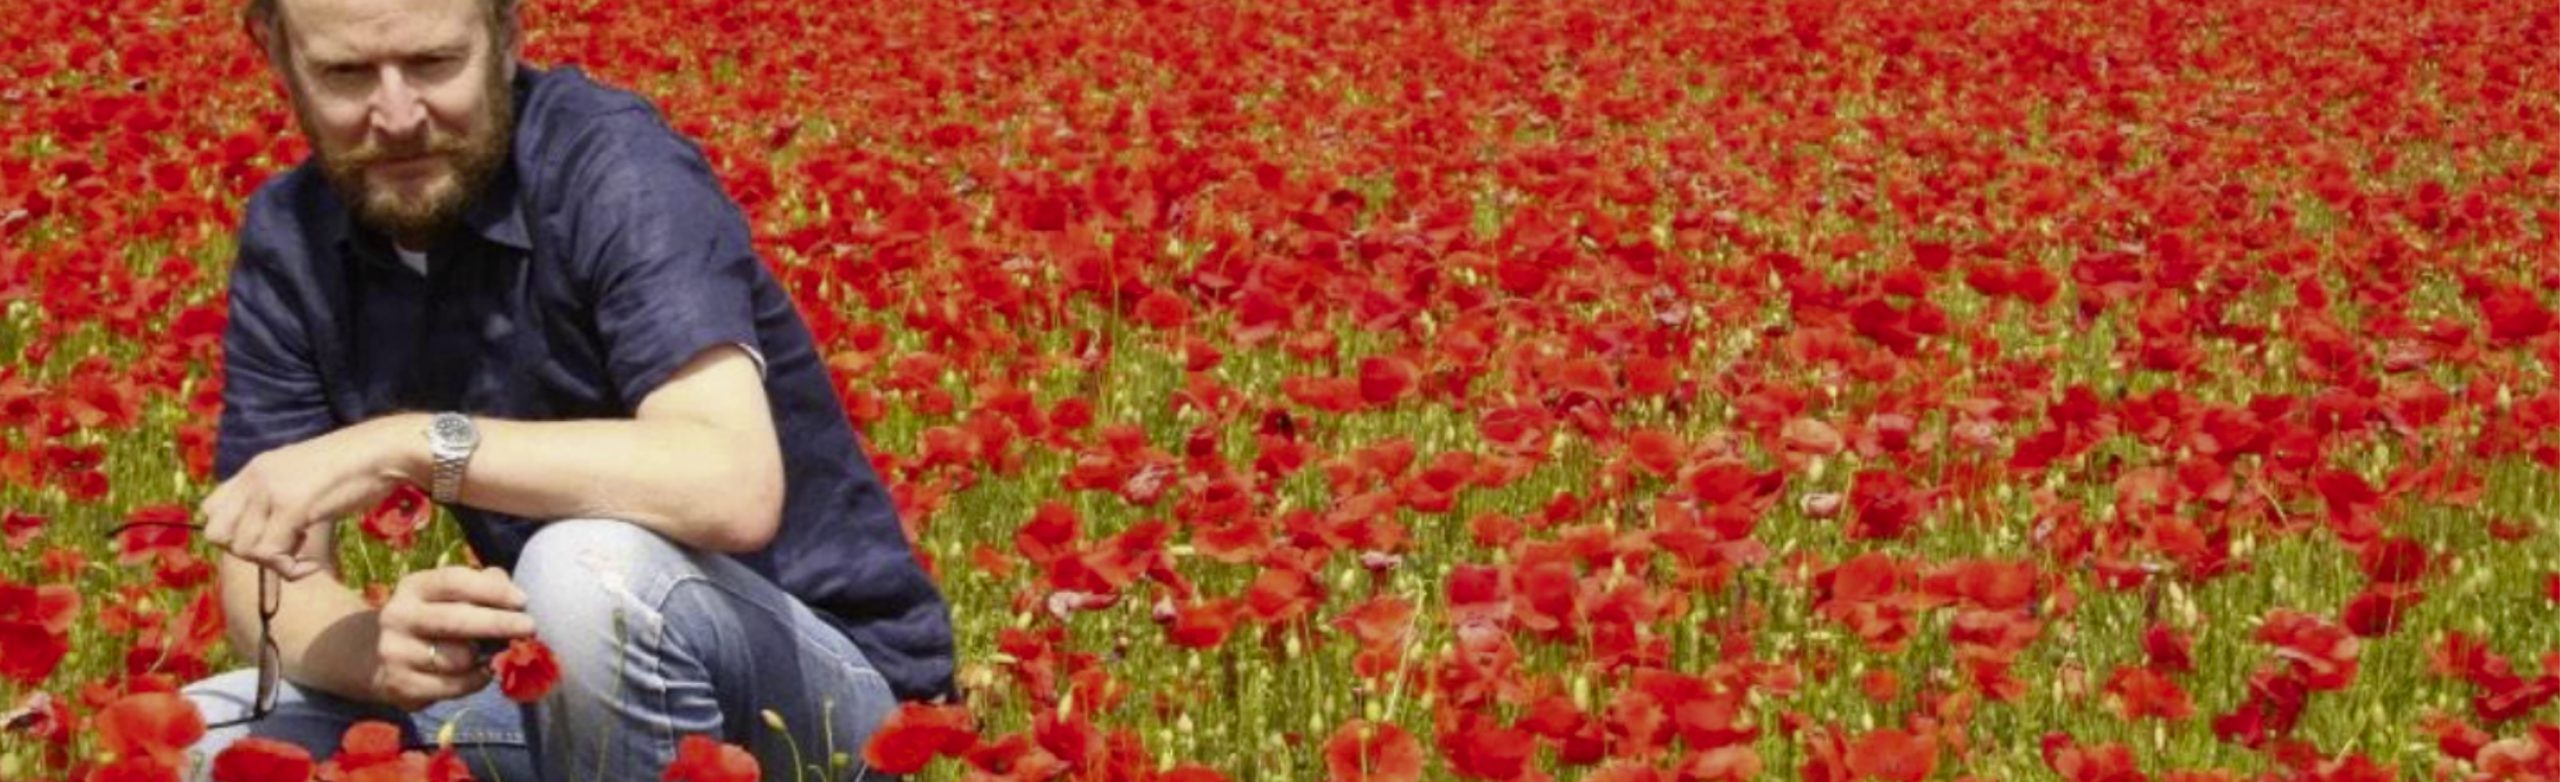 Alan James in a field of poppies